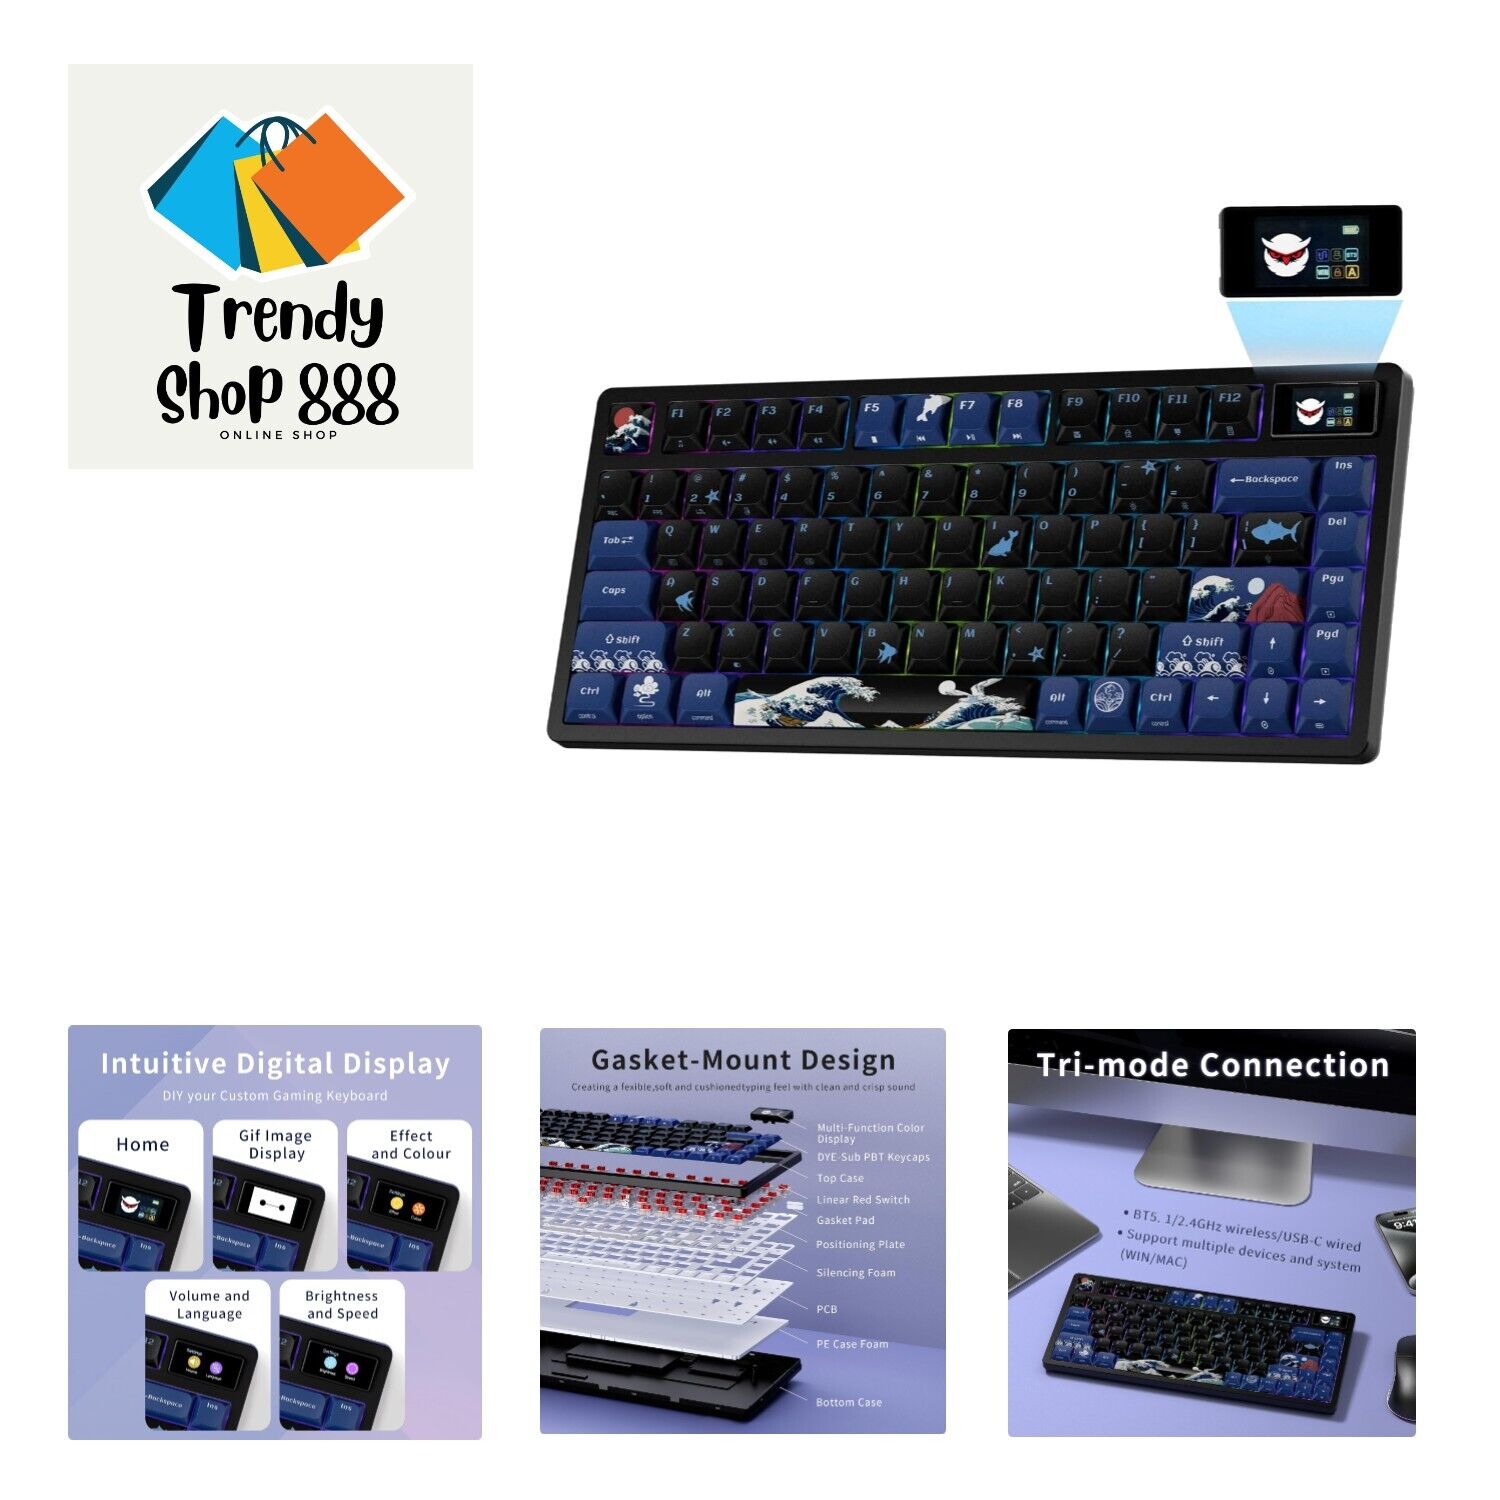 XVX 75% Keyboard with Color Smart Display, Low Profile Gasket Mechanical Gami...